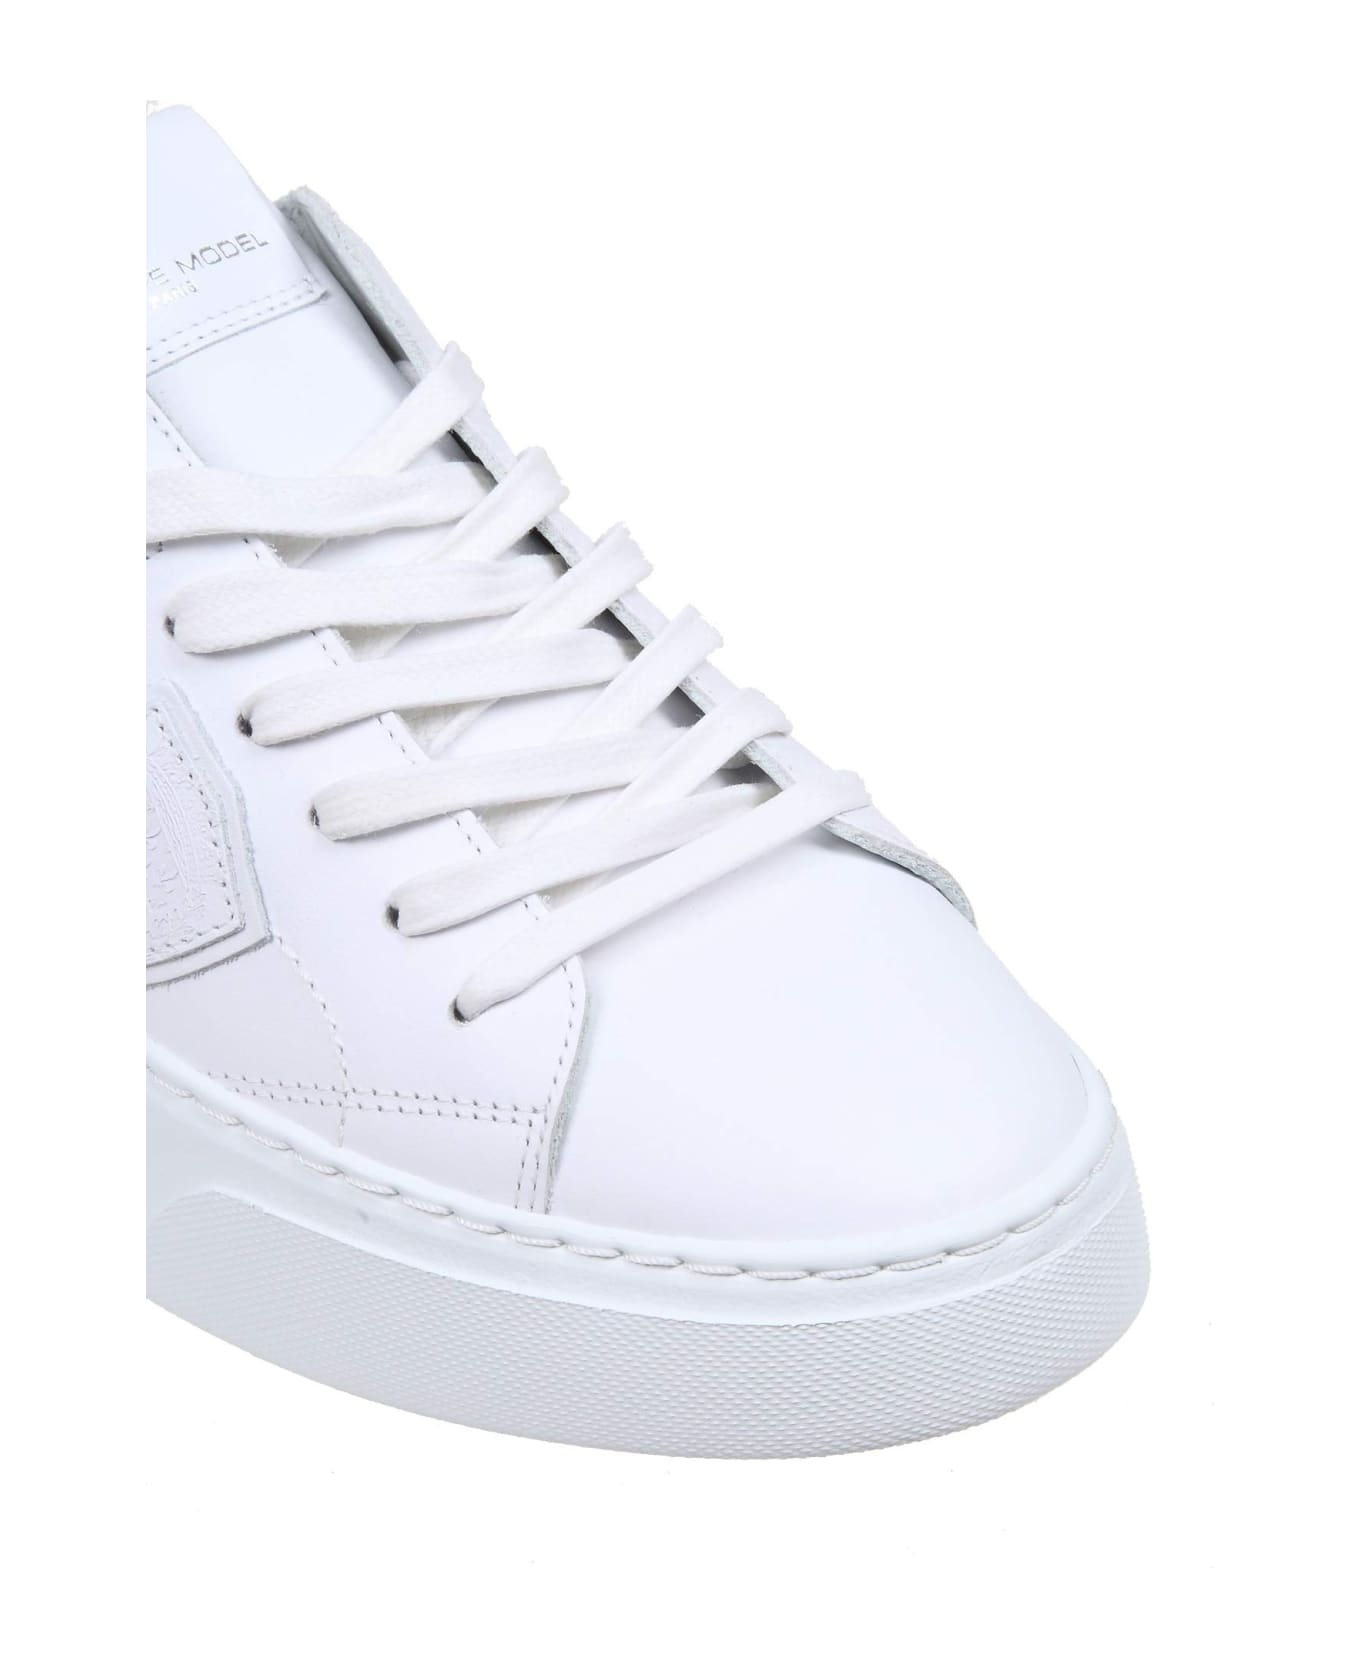 Philippe Model Temple Sneakers In White Leather - WHITE スニーカー